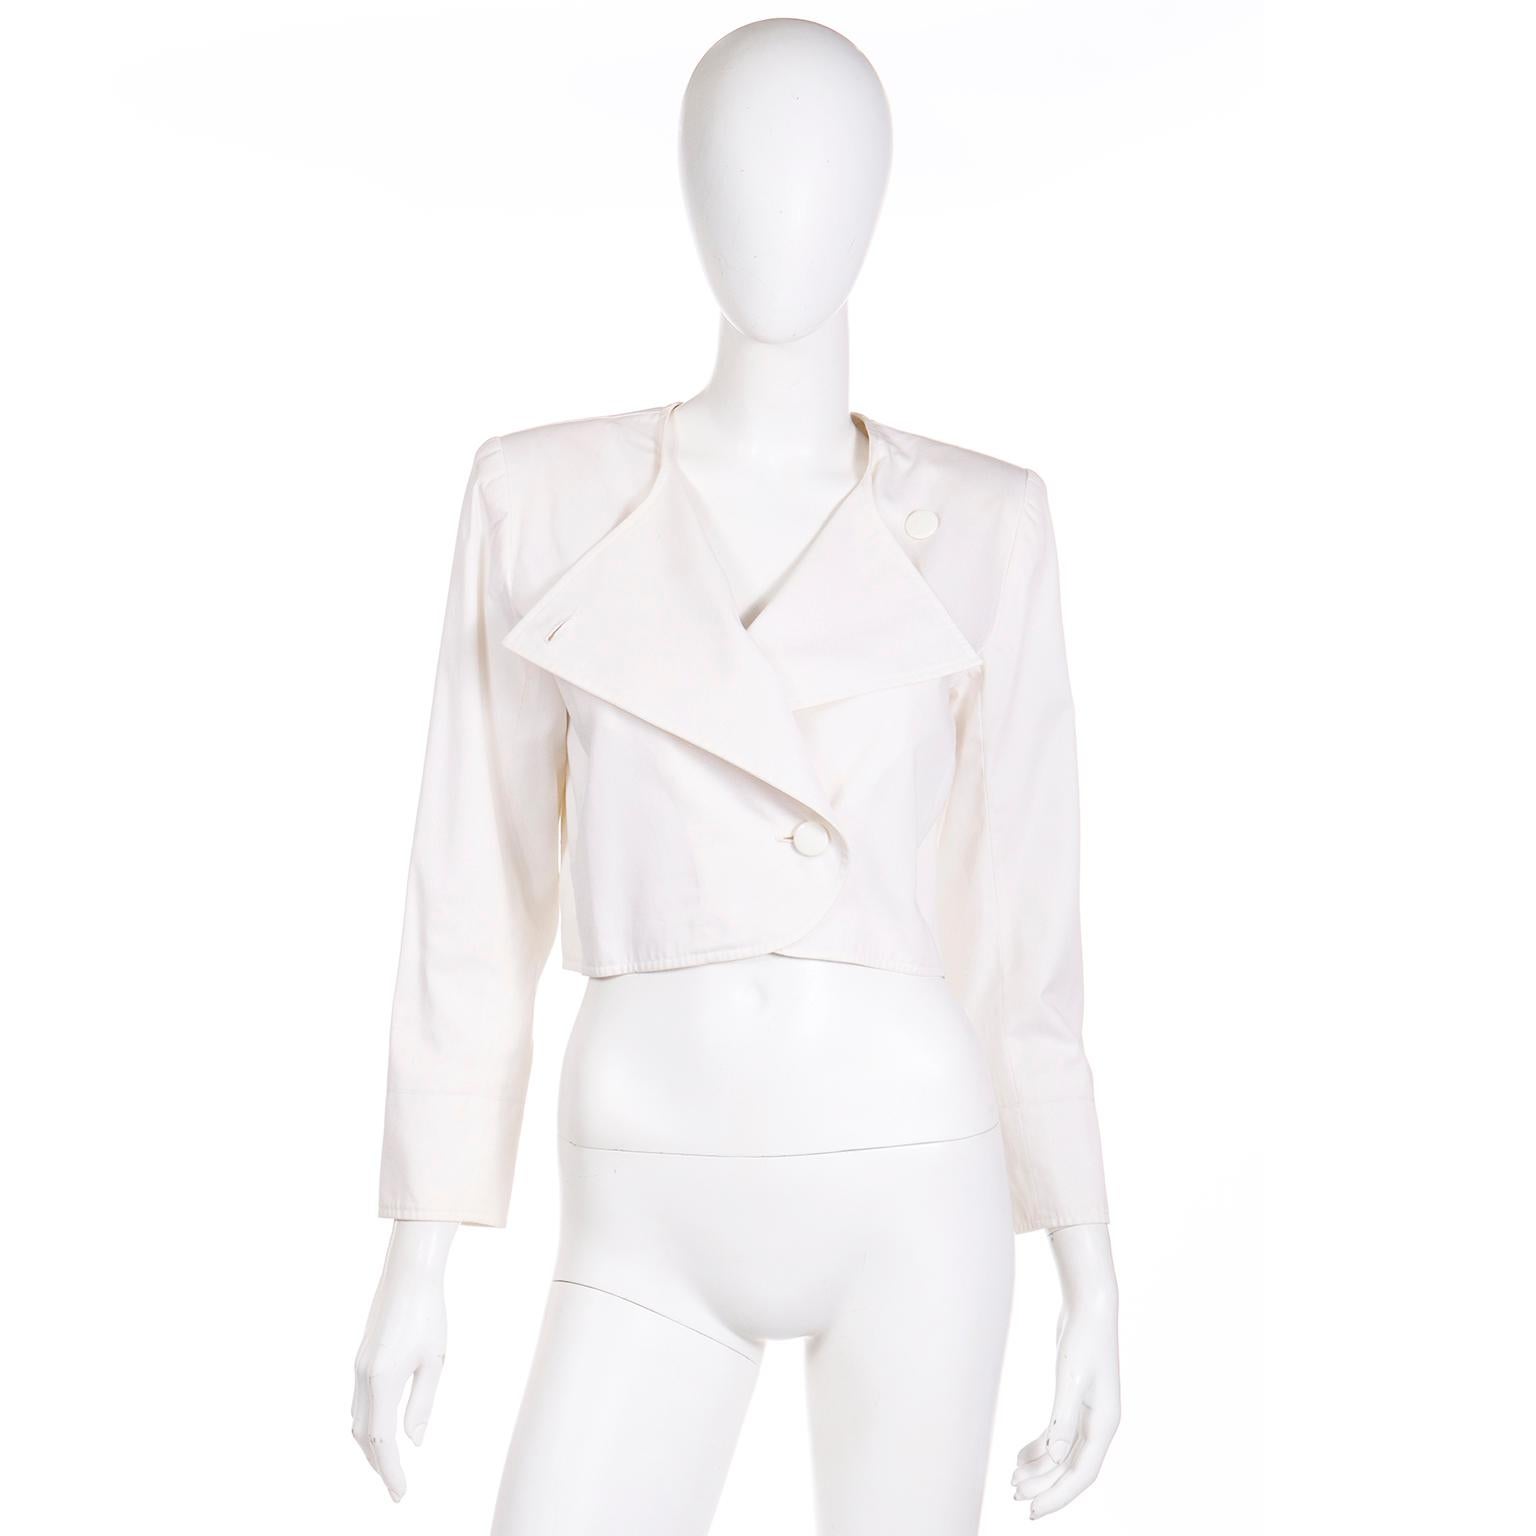 This vintage 1980's Yves Saint Laurent cropped jacket is in a luxe white cotton that is perfect for Summer!  This jacket has shoulder pads for structure, and a perfectly boxy cropped fit. You can choose to wear it closes with one button, to reveal